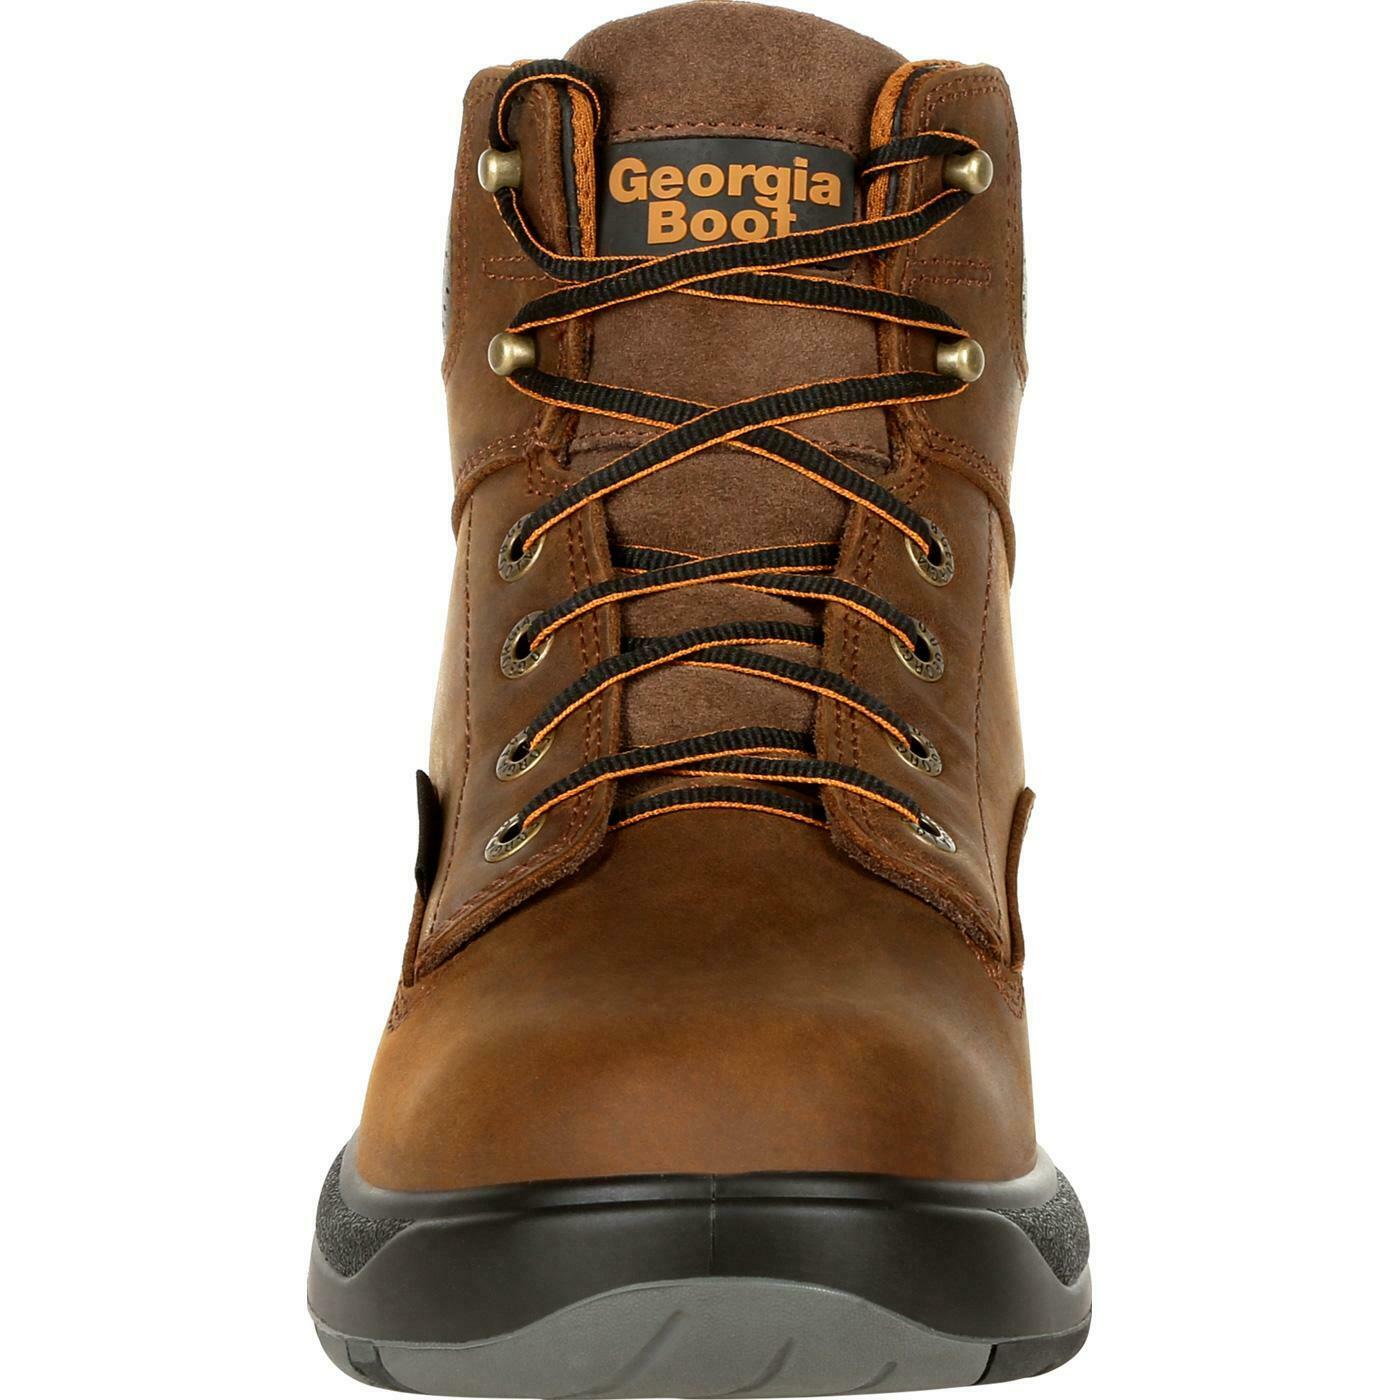 Georgia Boot FLXpoint Composite Toe Waterproof Work Boot G6644